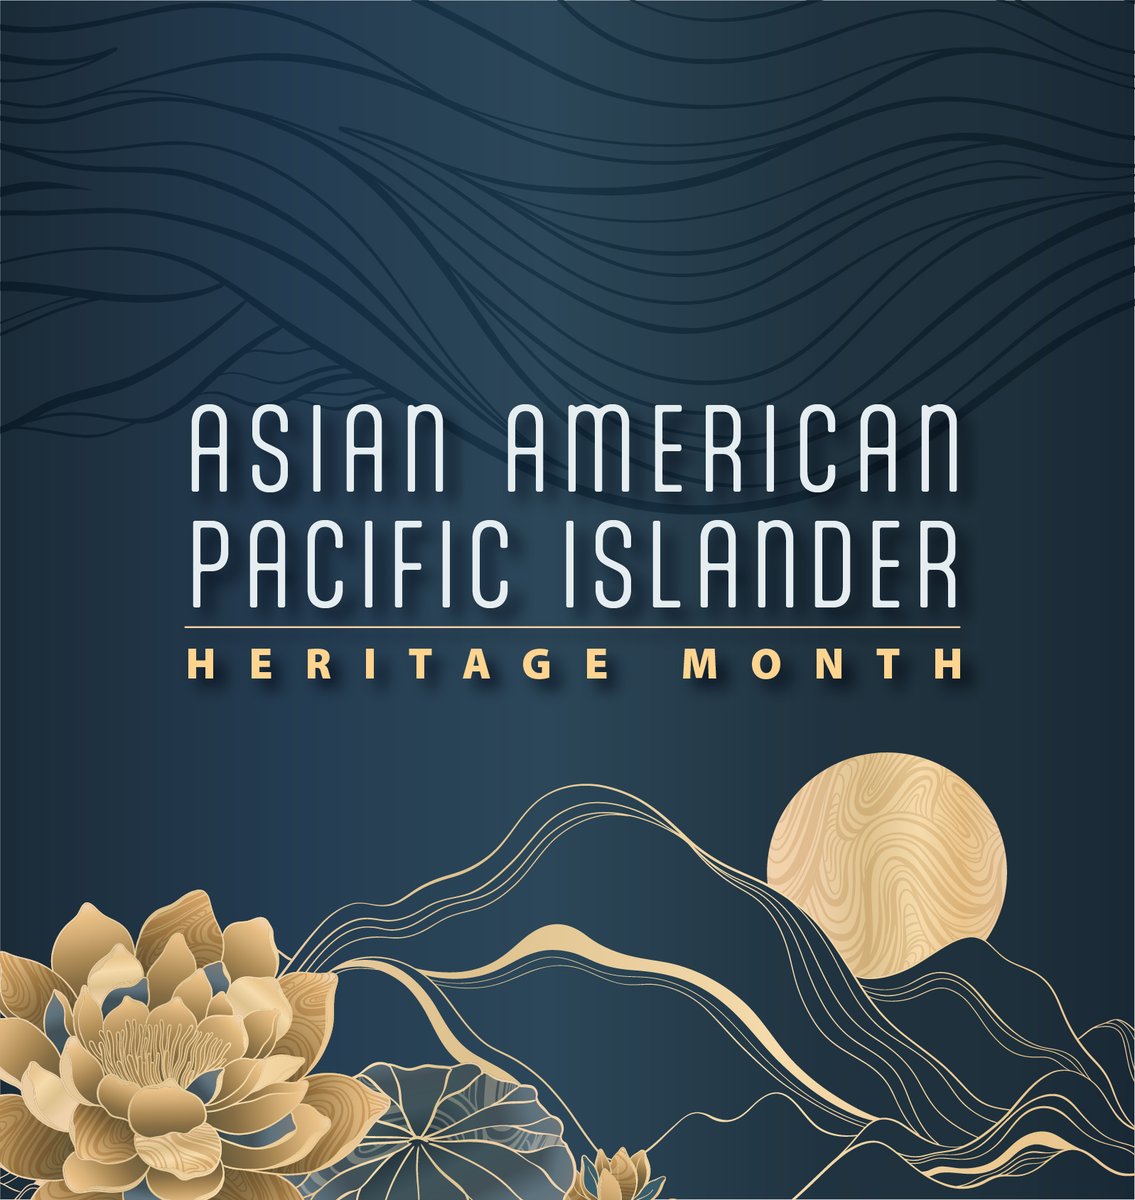 SFO is proud to celebrate AAPI Heritage Month this May! Traveling this month? Stop by the @SFOMuseum Video Arts gallery in the International Terminal to watch four films by AAPI creators and artists. #AAPIMonth